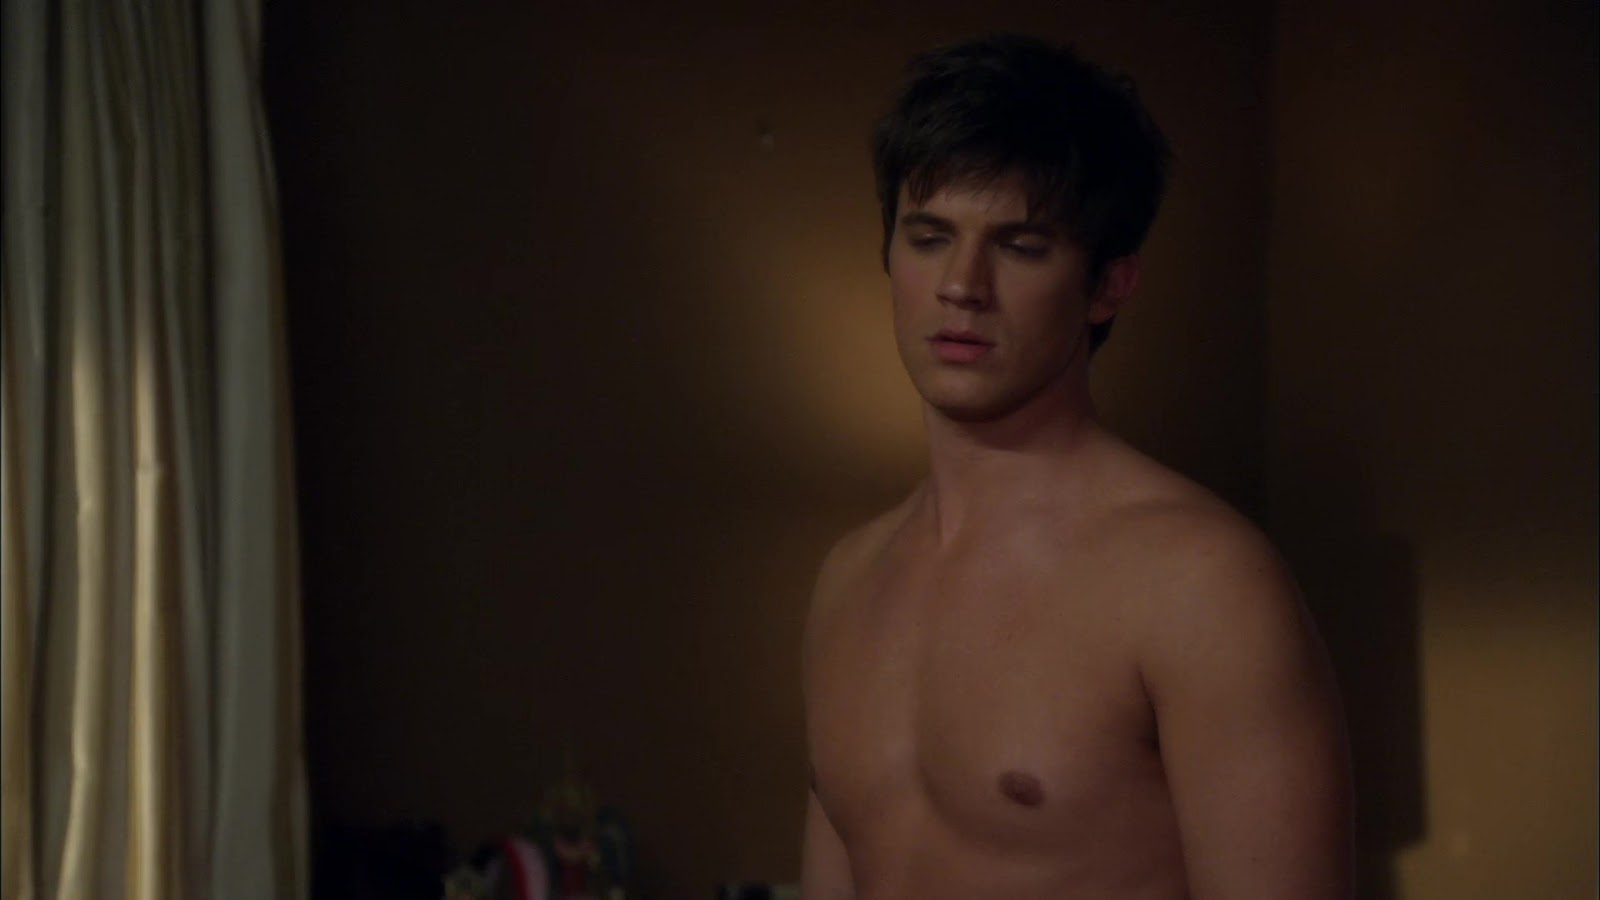 ausCAPS: Matt Lanter shirtless in 90210 1-24 "One Party Can 